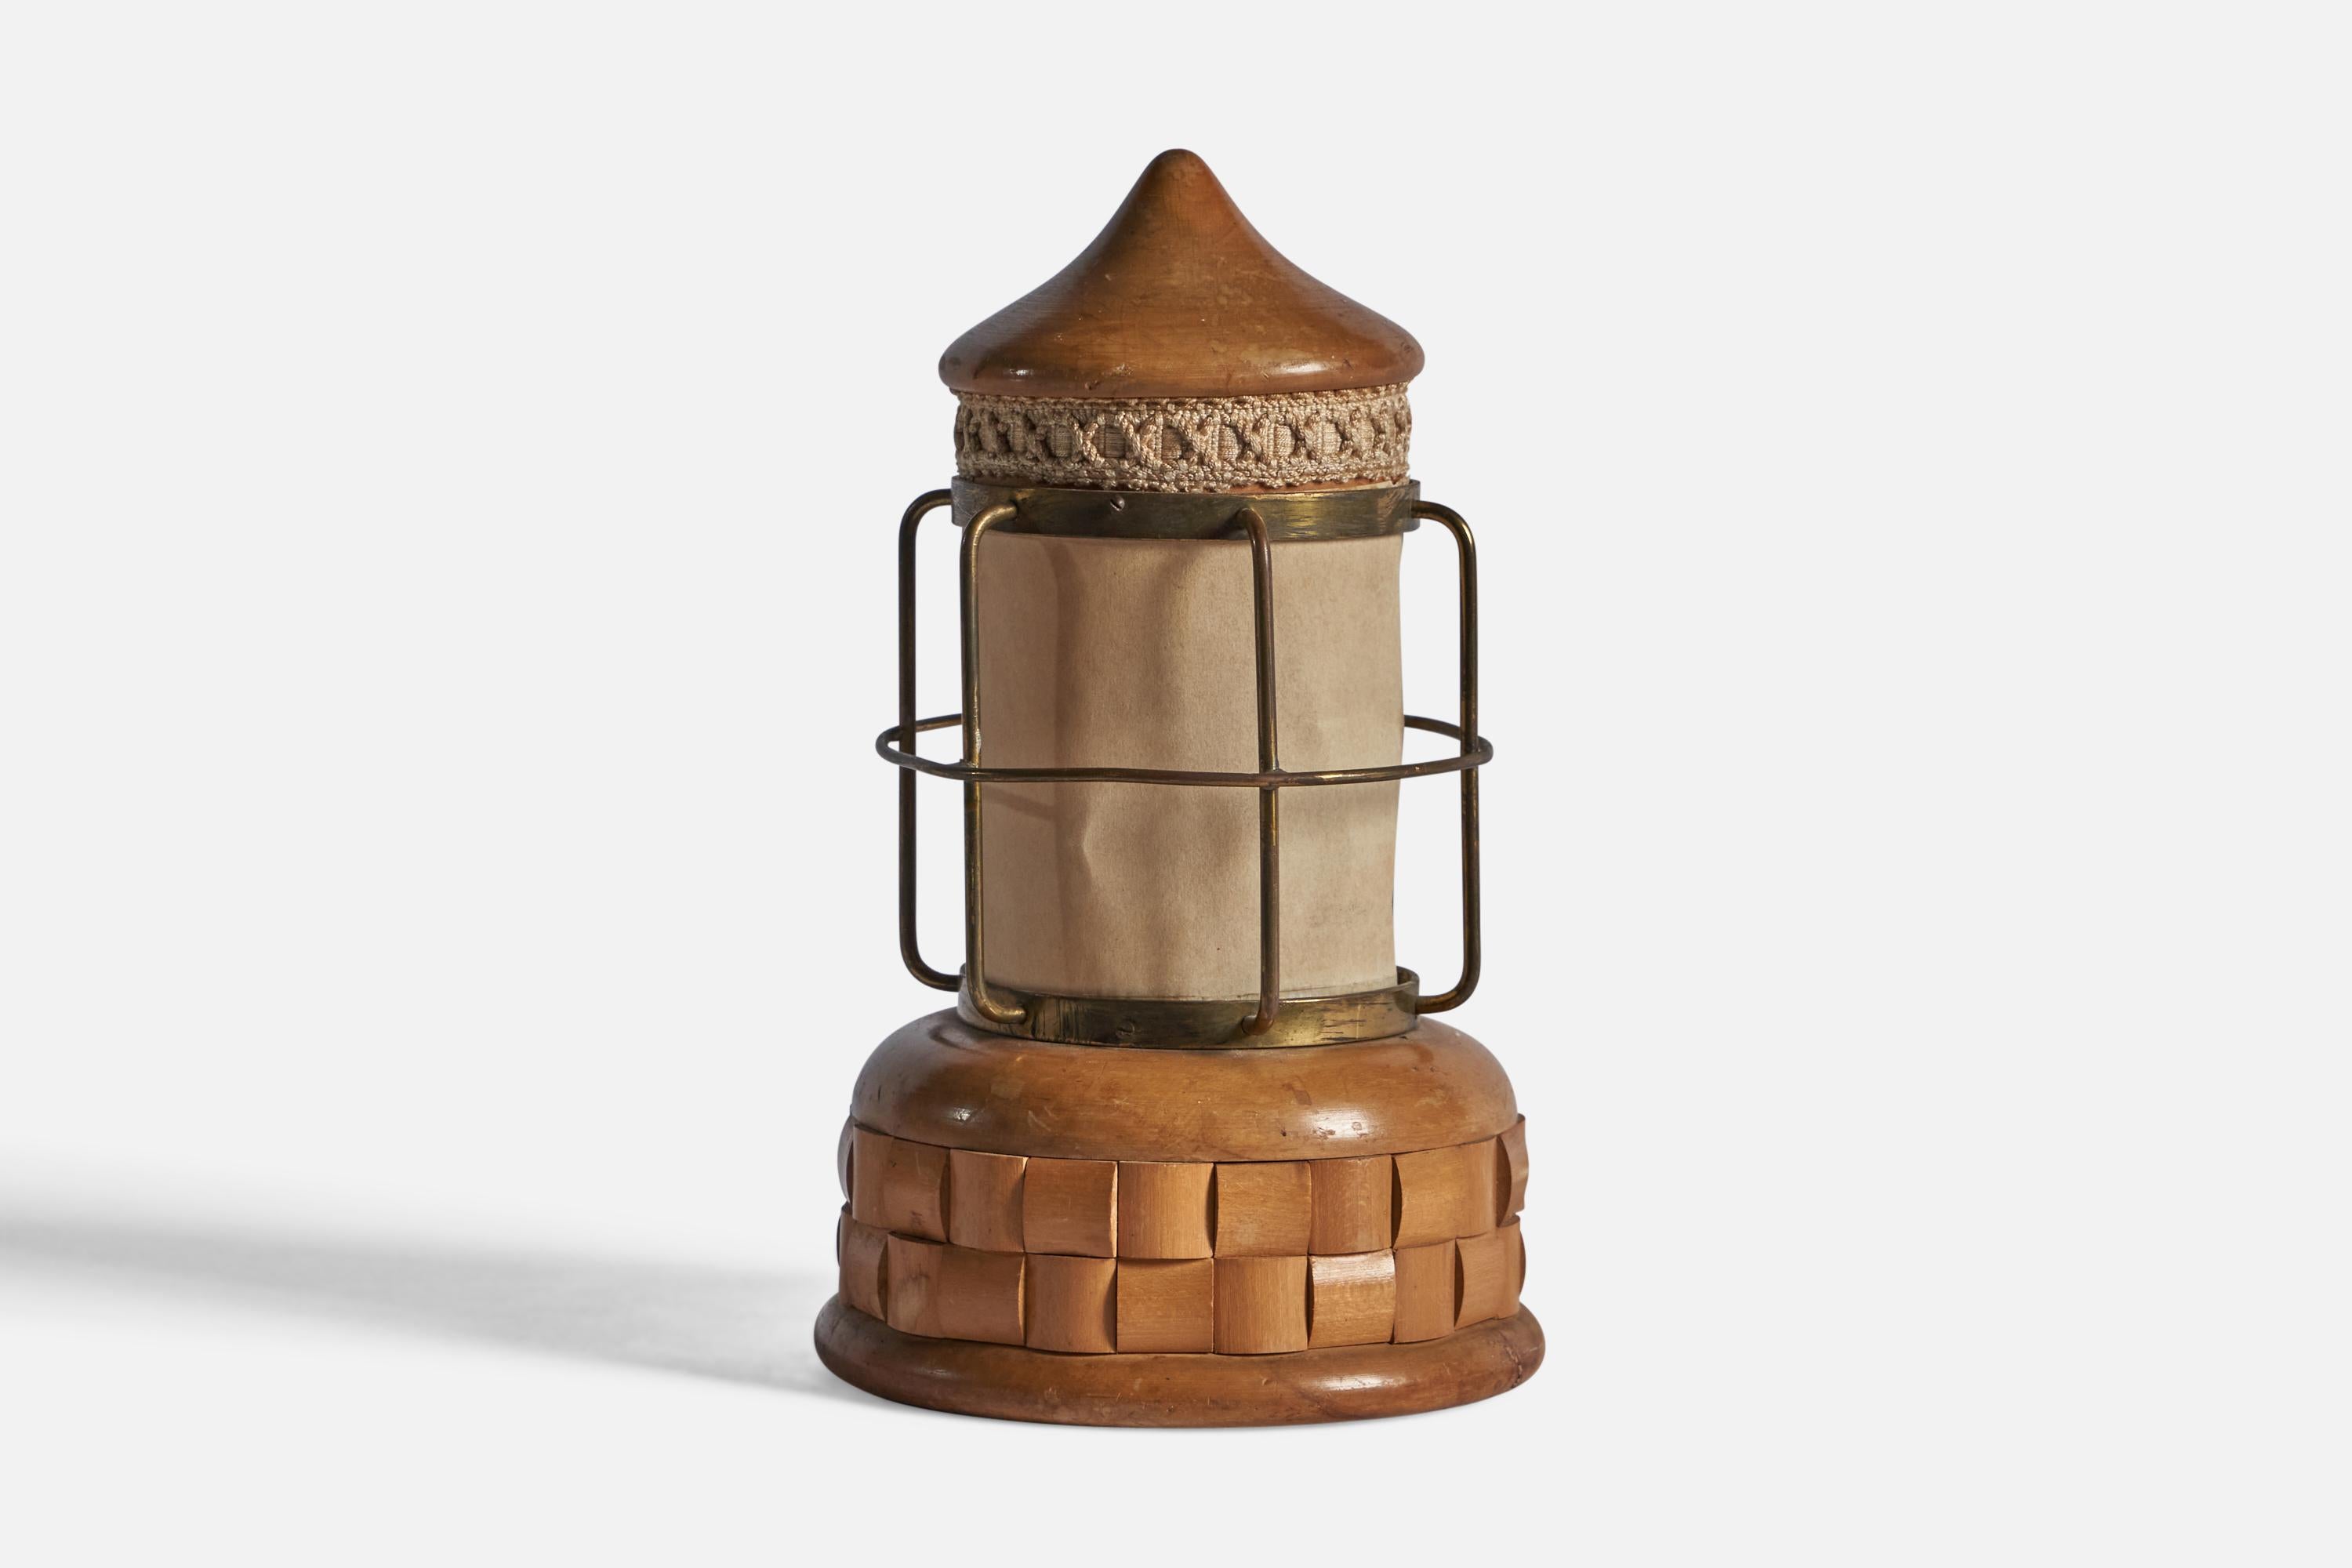 A brass, oak, fabric and paper table lamp, designed and produced by Aldo Tura, Italy, c. 1940s.

Overall Dimensions: 10.25